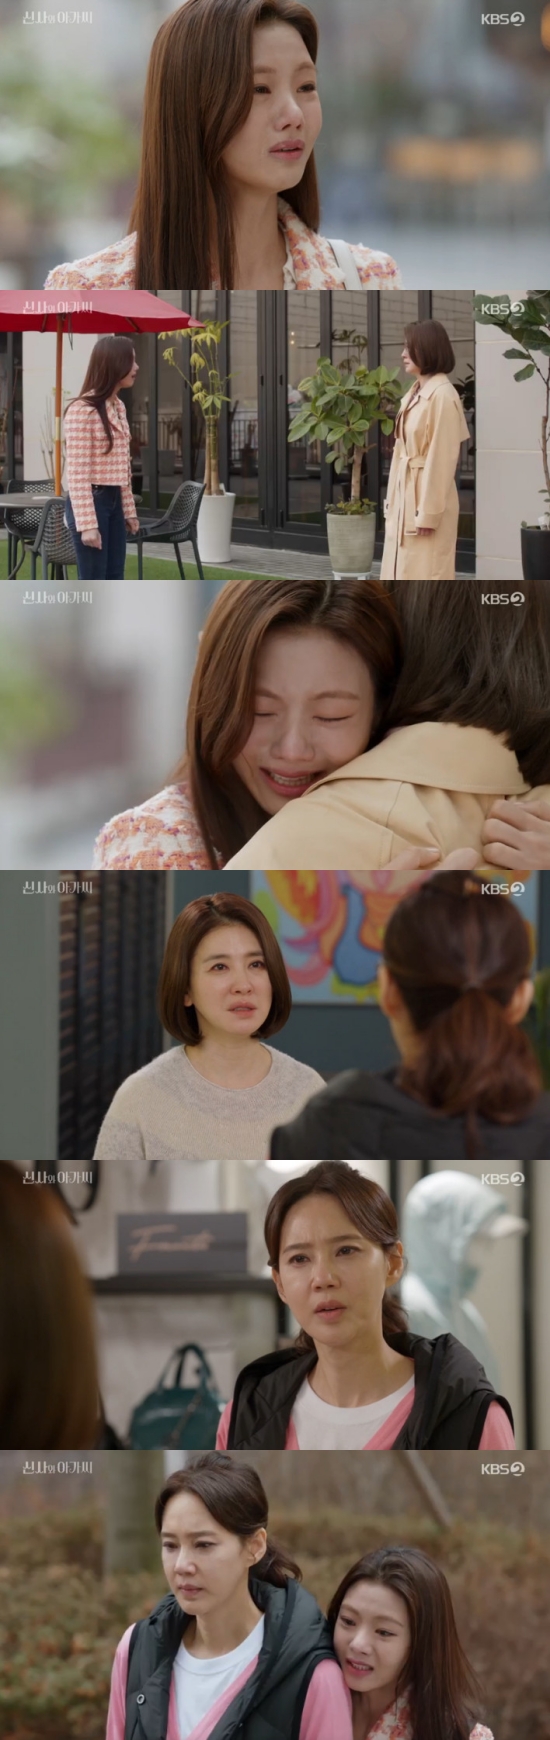 Gentleman and young lady Lee Se-hee was shocked to discover Lee Il-hwa who fell unconscious.In the 51st episode of KBS 2TV weekend drama Gentleman and Young Lady, which aired on the 26th, Park Dan-dan (Lee Se-hee) was shown nursing Anna Nicole Smith Kim (Lee Il-hwa).Anna Nicole Smith Kim and Park Dan were alone with the help of Lee Young-guk, and Anna Nicole Smith Kim showed a sad feeling to drink coffee after the meal.Park said, Can I drink coffee? I said youre going to surgery next week. Anna Nicole Smith Kim said, I just want to sit in front of you.I want to see your face a little bit, he confessed.You want to be here with me. You want to see my face. Whyd you fool me? If youd told me who you were, we could have stayed together a little longer.Why do you hurt people so much? Anna Nicole Smithkim said, Dont cry, this mother is sorry, and Park Dan-dan embraced Anna Nicole Smithkim, who said, Mom.Im sorry, he said.Furthermore, Park stayed overnight at Anna Nicole Smith Kims house to nurse when Anna Nicole Smith Kim complained of pain.But Cha Yeon-sil made a pumpkin porridge for Anna Nicole Smith Kim and went to her house herself.At this time, Cha Yeon-sil was angry to learn that Park Dan-dan, who said he was sleeping at Friends house, was at Anna Nicole Smith Kims house.You dont have to come home anymore, you live here, you live with your mother, Cha said, turning around, and Park Dan-dan followed the car room.Park said, Im sorry for my mother. And Cha said, I thought you would understand me because Dandan was on my side.I lied to you that you are sleeping at Friends house and if you say you are coming here, did you think you would stop me from coming? Im so sorry, Im sorry, Im sorry, I couldnt leave it alone yesterday when Anna Nicole Smith was sick and sick.I lied to her about sleeping at Friends house because I thought shed be upset. Anna Nicole Smith hates me so much.I am so sorry, but can not you understand me once? In the end, Cha Yeon-sil understood Park and encouraged Anna Nicole Smith to take care of her father.Park Dan stayed at Anna Nicole Smith Kims house, and Anna Nicole Smith Kim said, I do not think there will be any time if I really die now.I mean, Im so happy now. Im with you like this. The next day Anna Nicole Smith Kim collapsed alone in the bathroom while Park Dan Dan was asleep; Park Dan Dan Dan was shocked to discover Anna Nicole Smith Kim late.Photo = KBS Broadcasting Screen